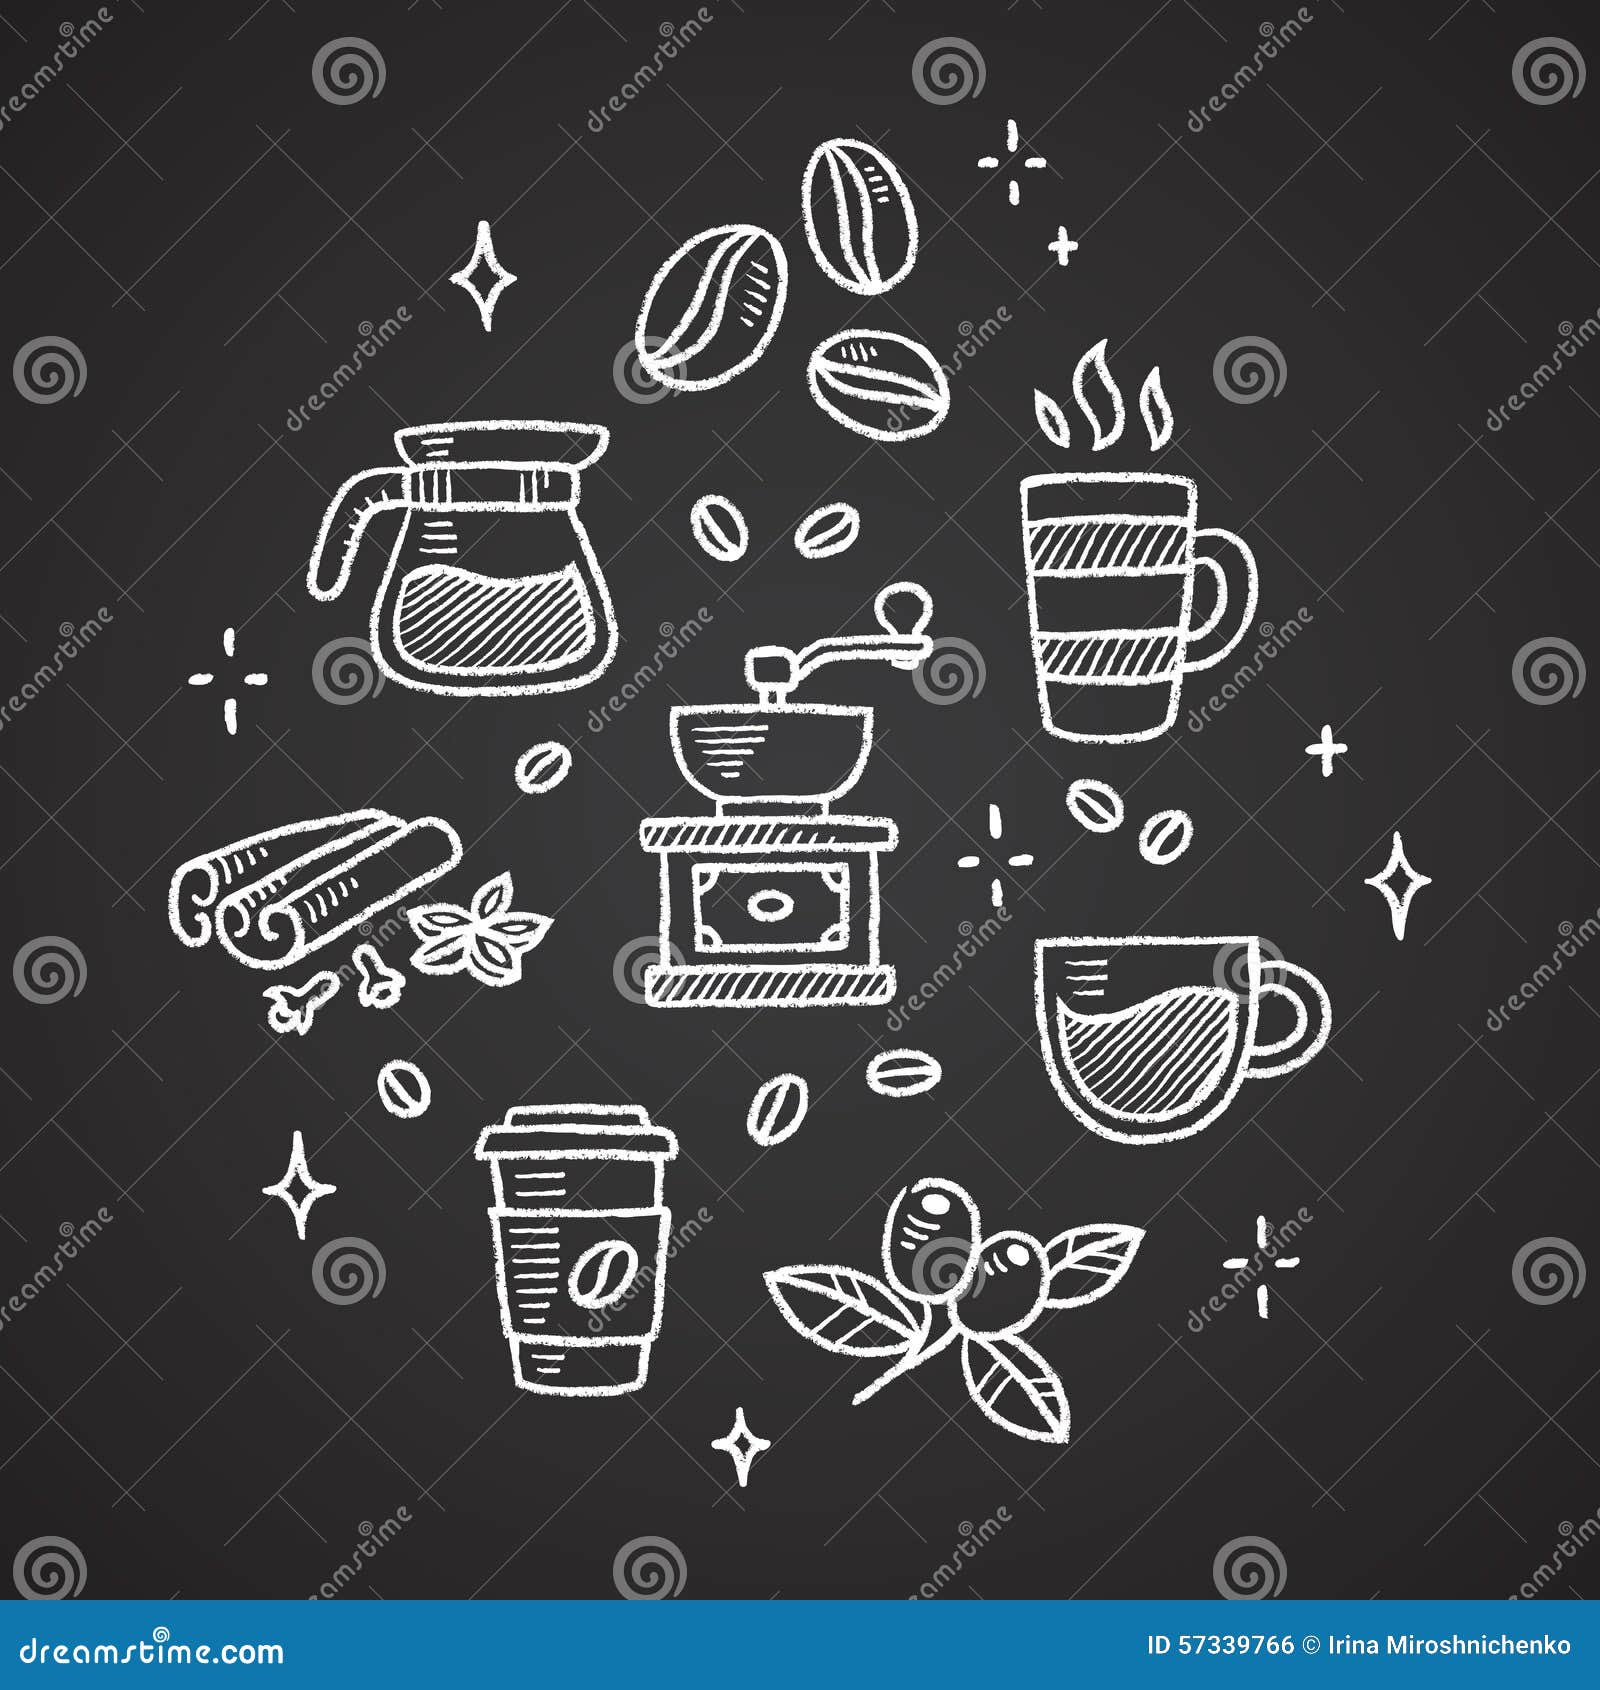 Coffee Beans Cover Design Set Stock Illustration - Download Image